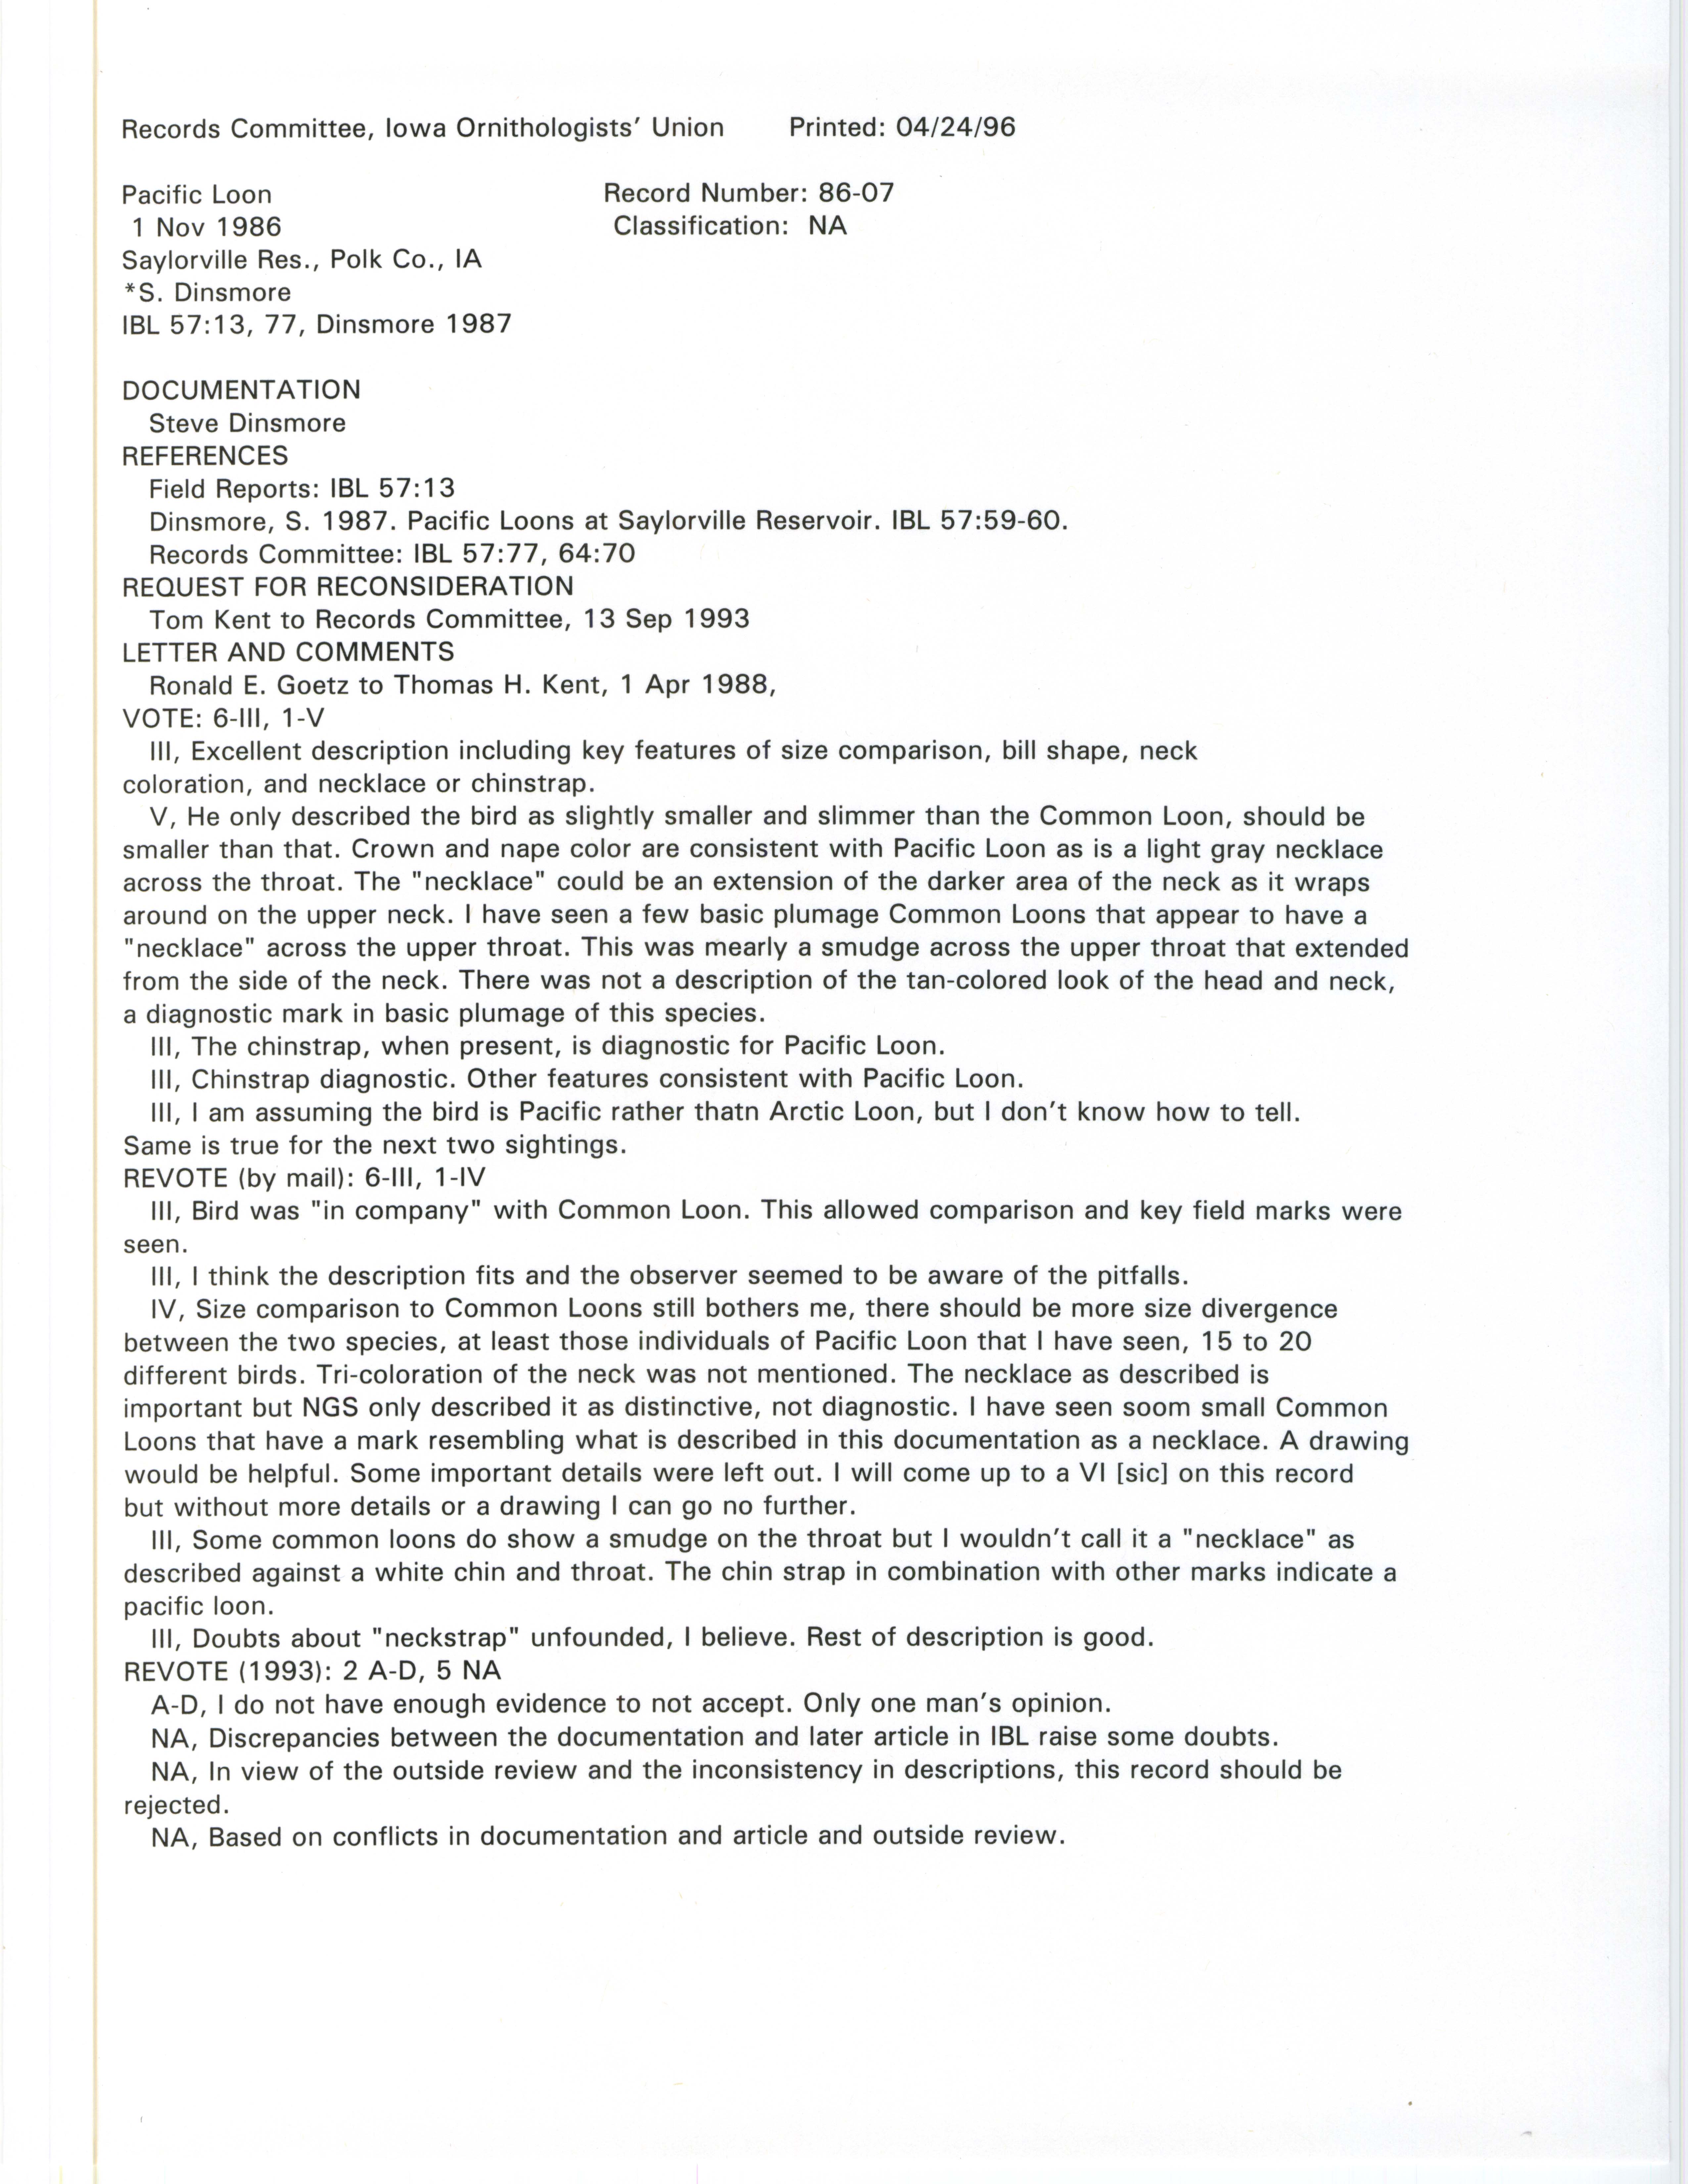 Records Committee review for rare bird sighting of Pacific Loon at Saylorville Reservoir, 1986